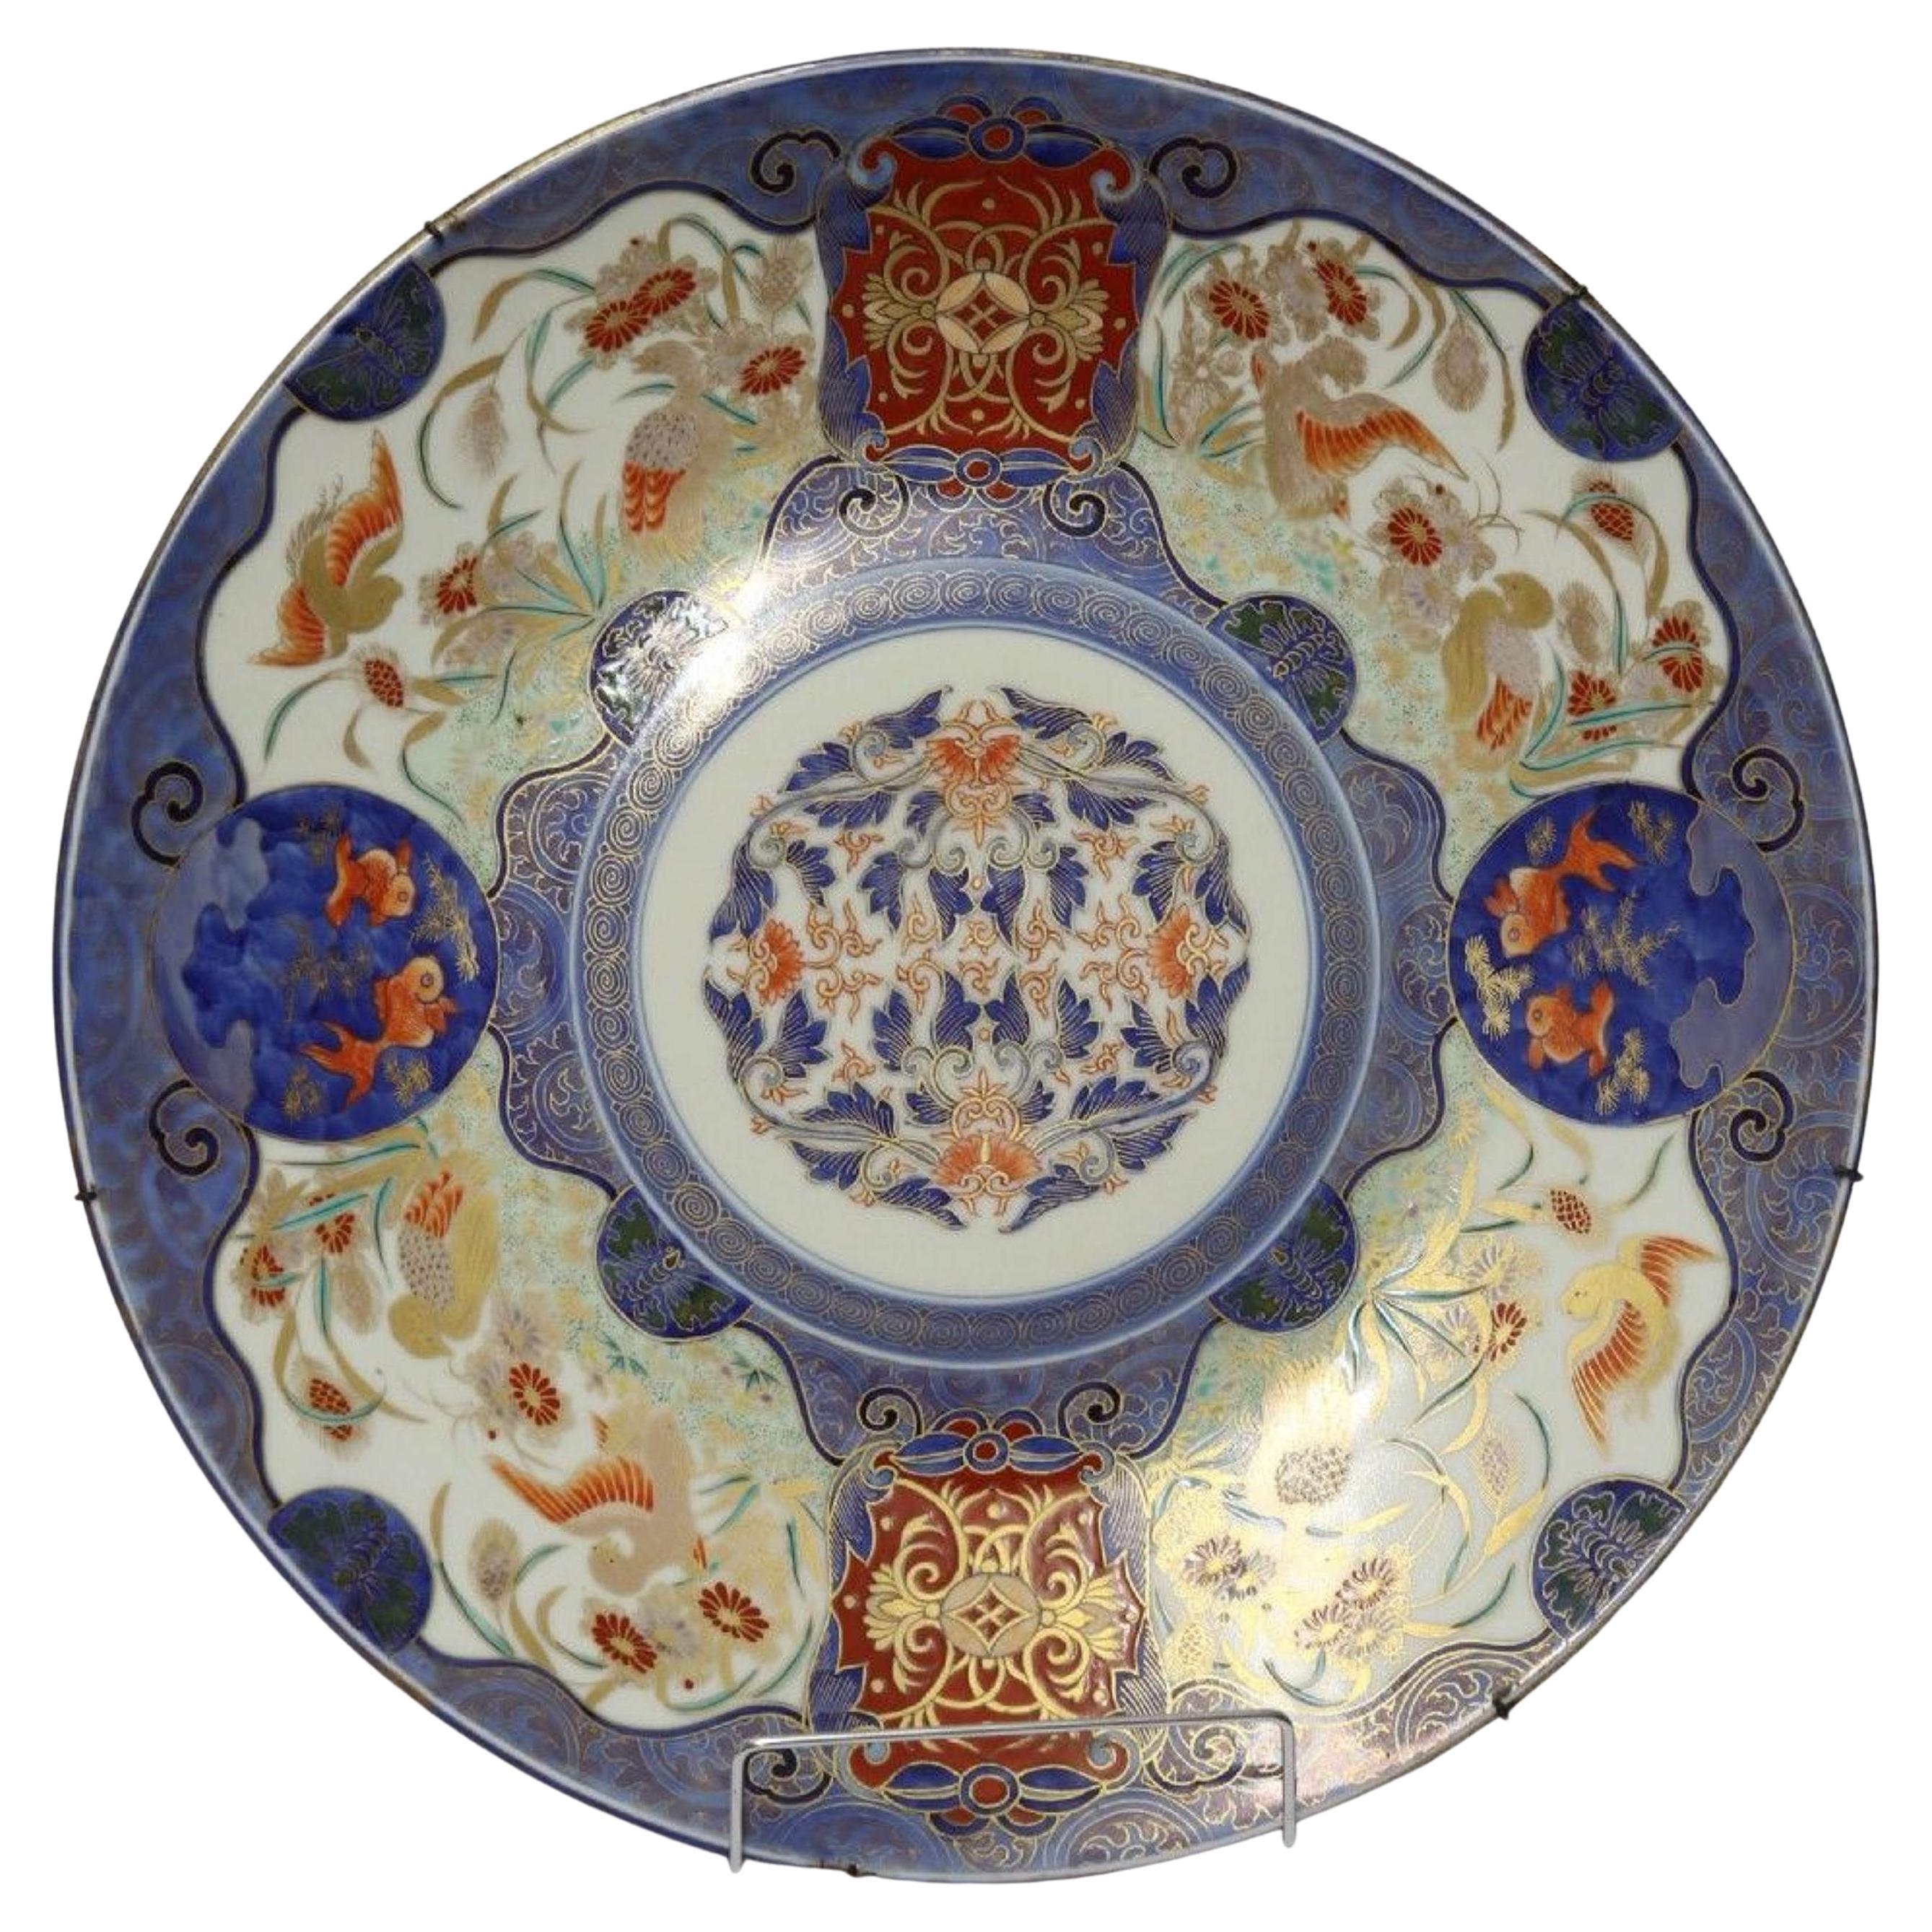 A Large Japanese Meiji Period Porcelain Charger, Circa 1890